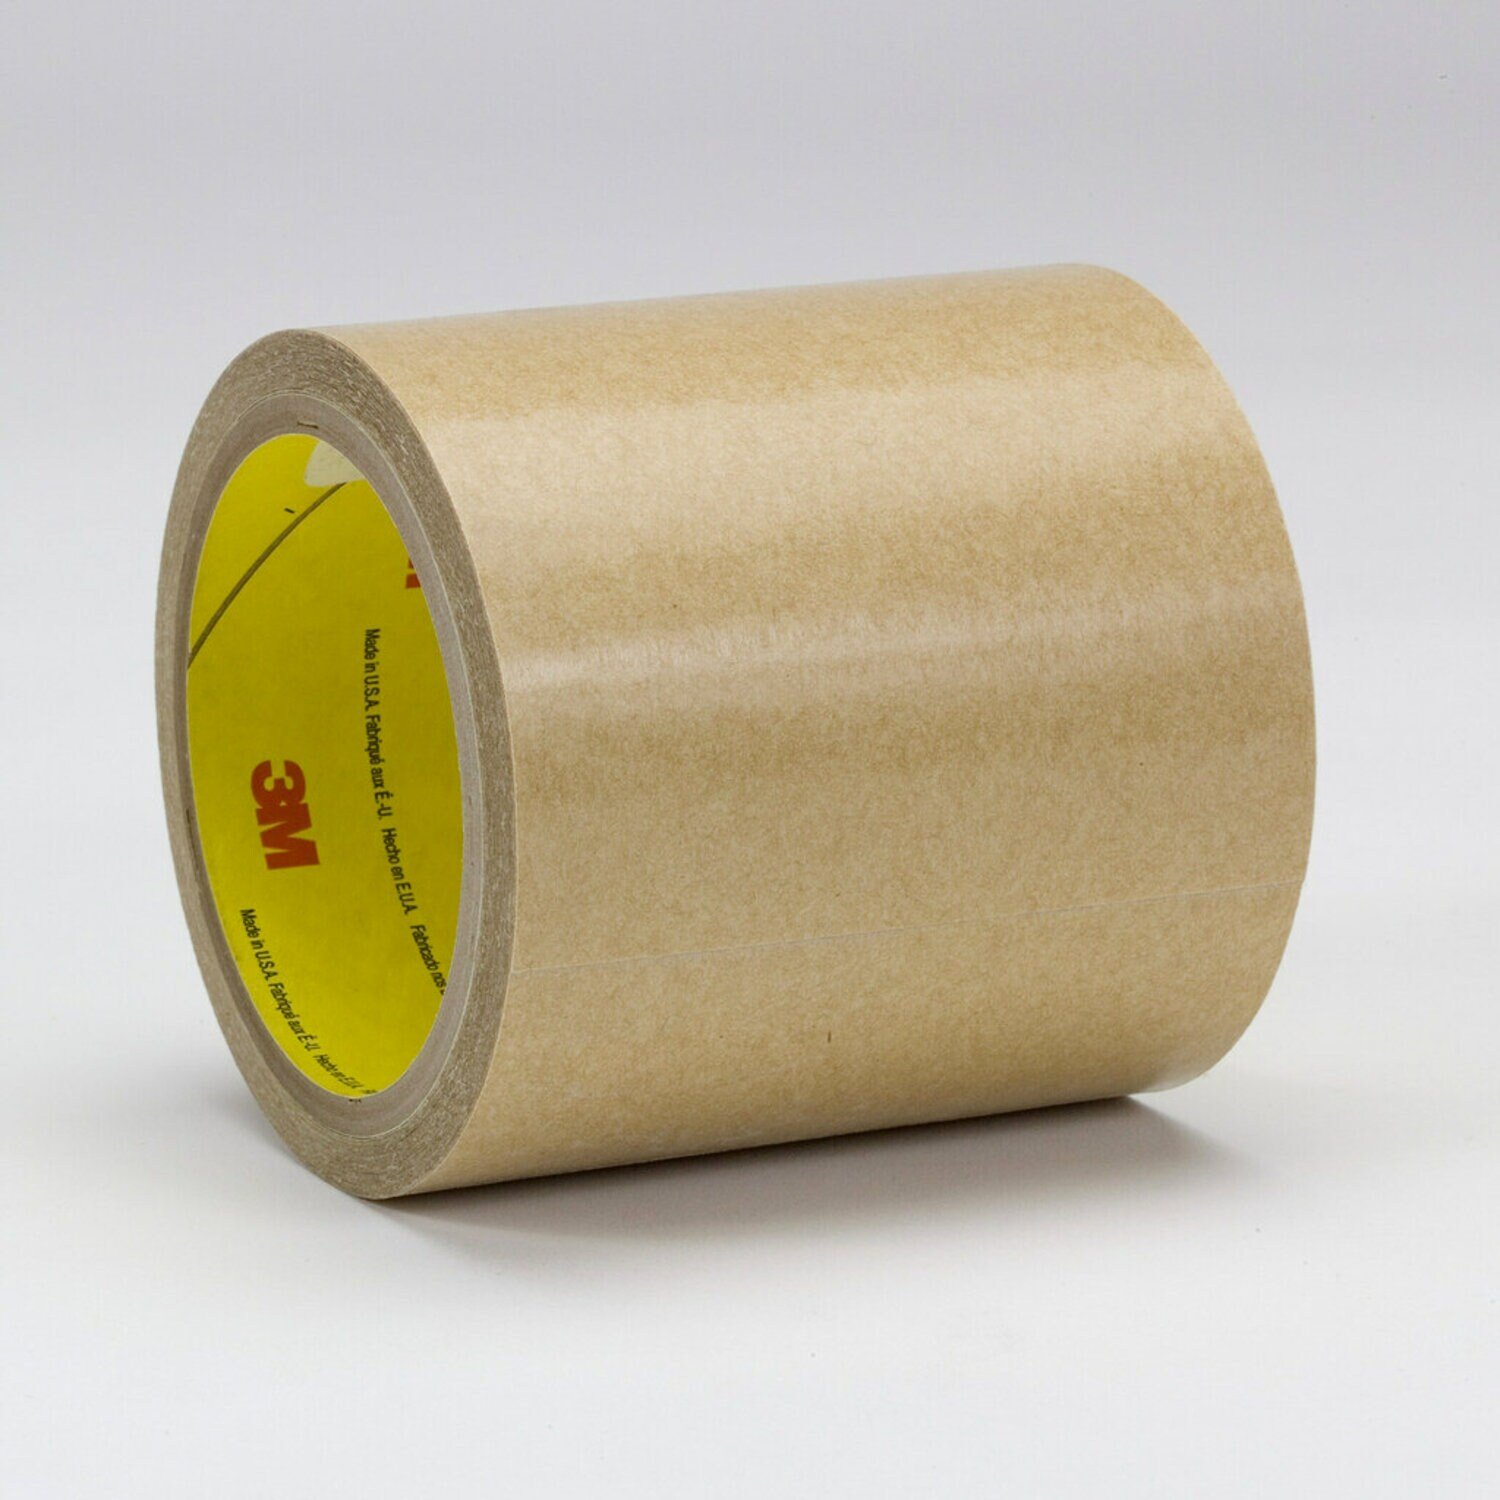 7010374600 - 3M Adhesive Transfer Tape 950, Clear, 1 3/4 in x 60 yd, 5 mil, 24 rolls
per case